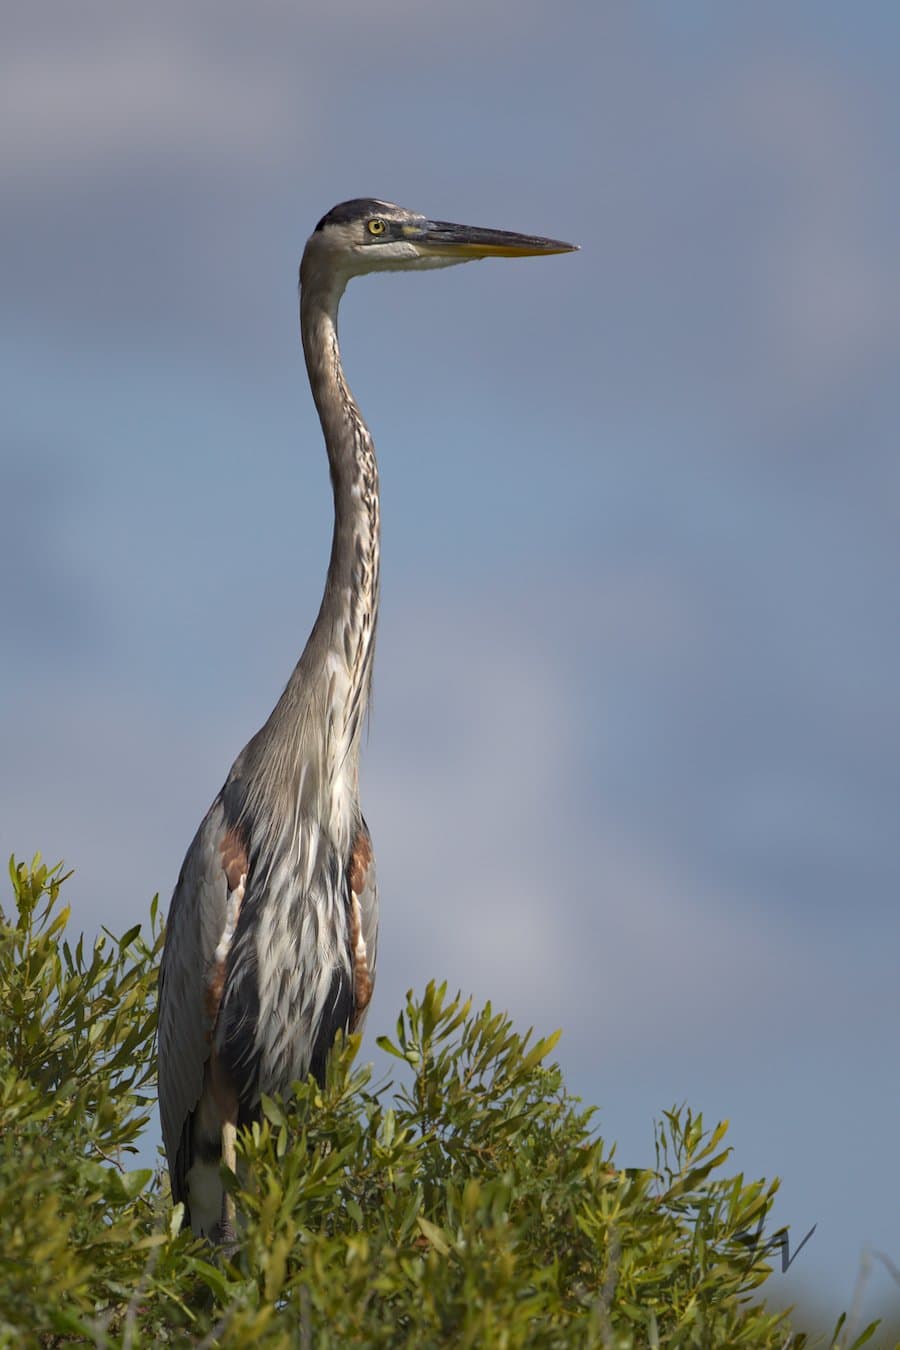 Great Blue Heron portrait atop small tree against cloudy blue sky.